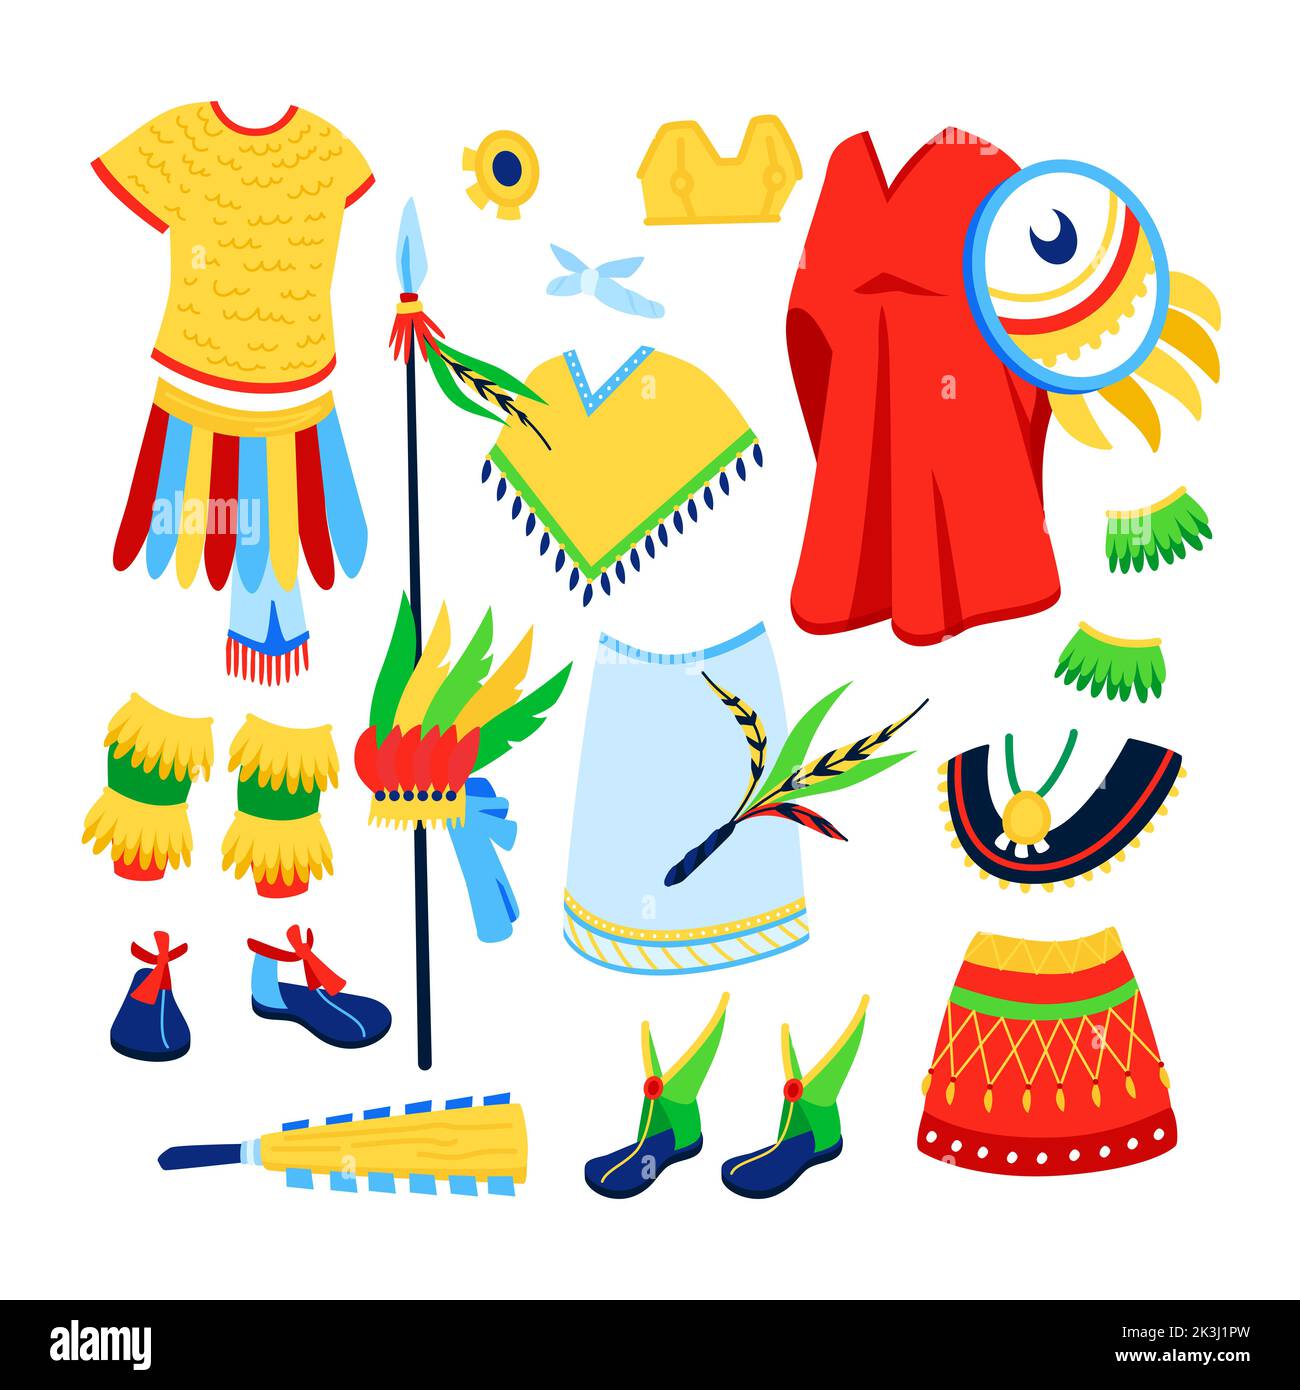 Clothing of the ancient Mayans - flat design style illustration set Stock Vector